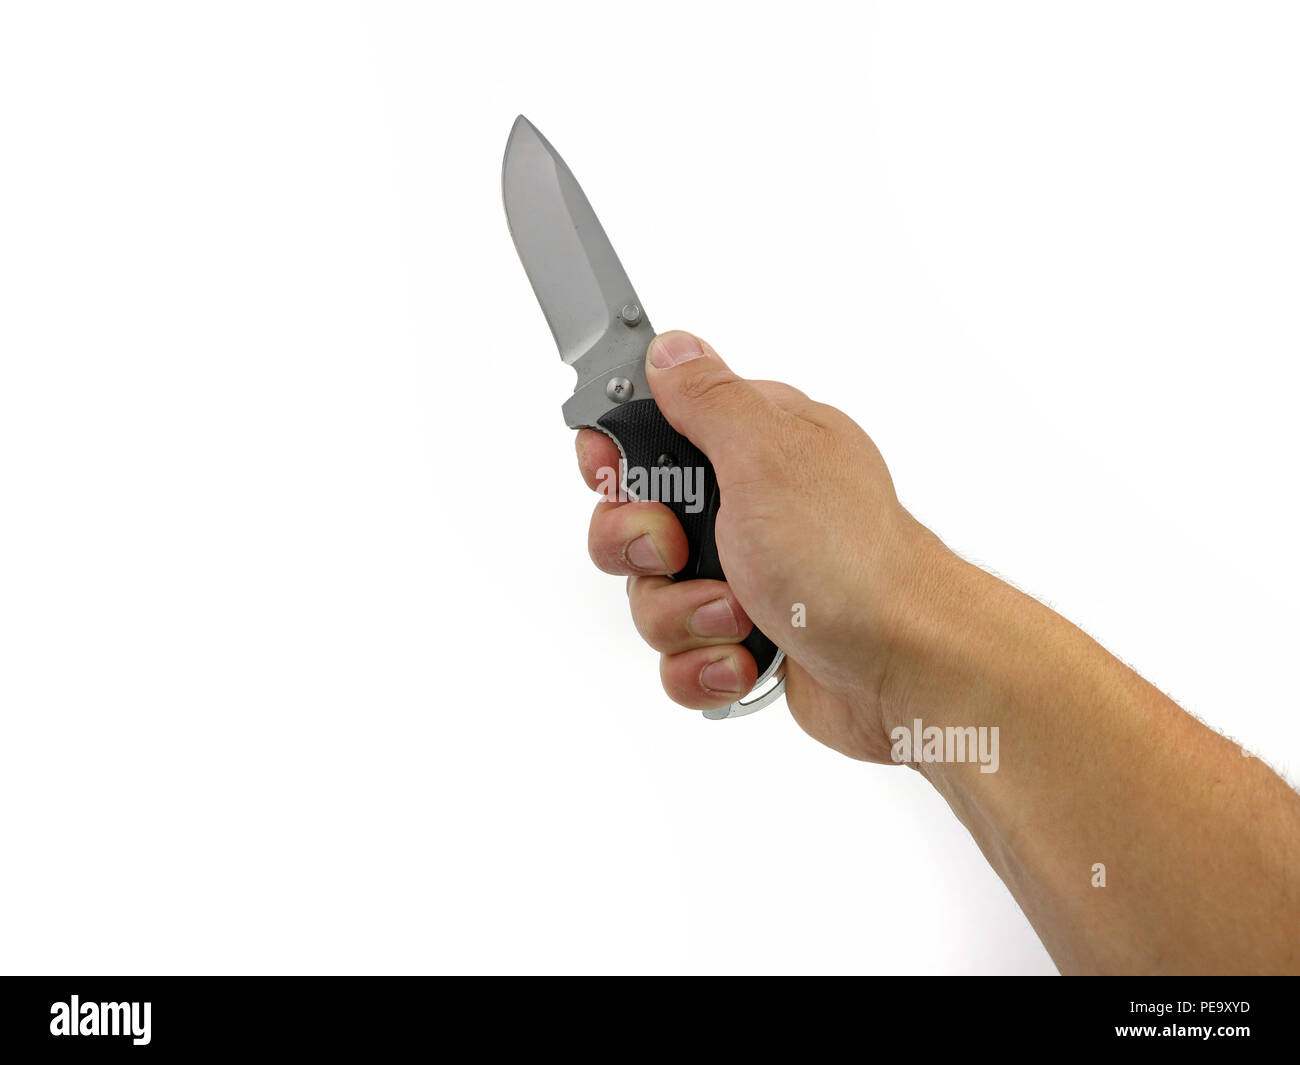 https://c8.alamy.com/comp/PE9XYD/hand-holding-a-knife-in-a-first-person-view-isolated-on-white-background-PE9XYD.jpg